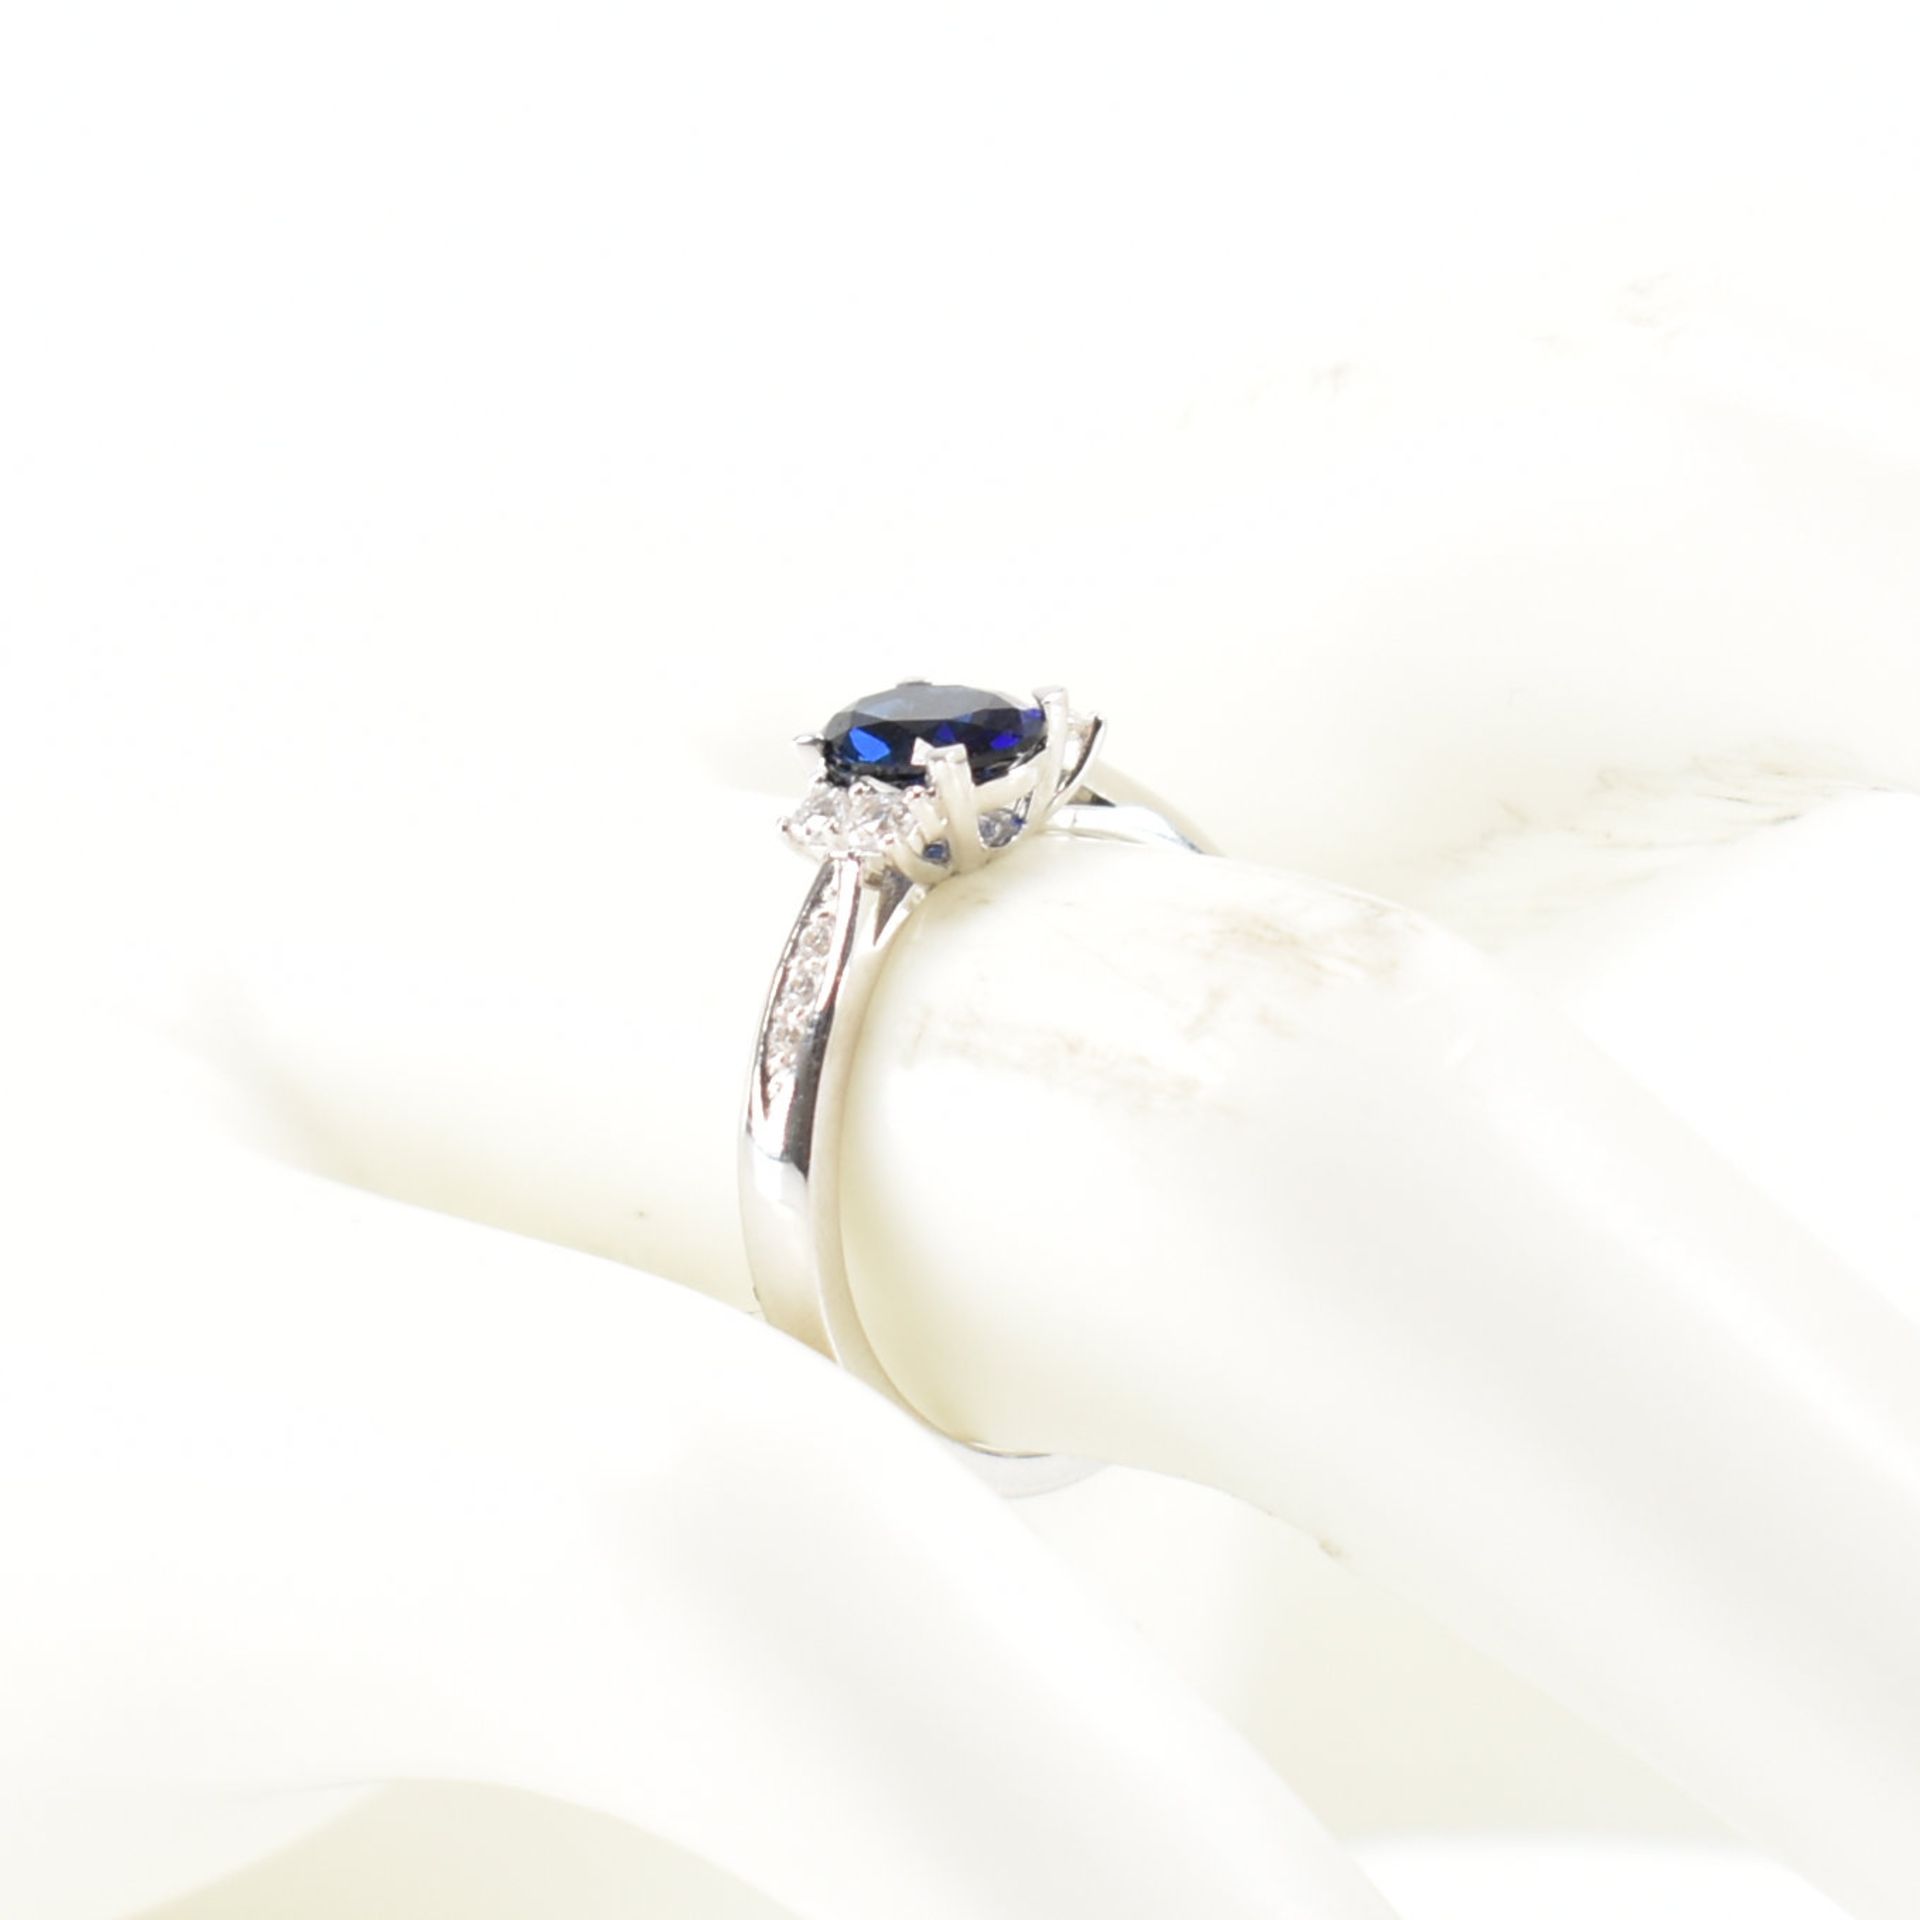 HALLMARKED 9CT GOLD SYNTHETIC SAPPHIRE & CZ RING - Image 8 of 8